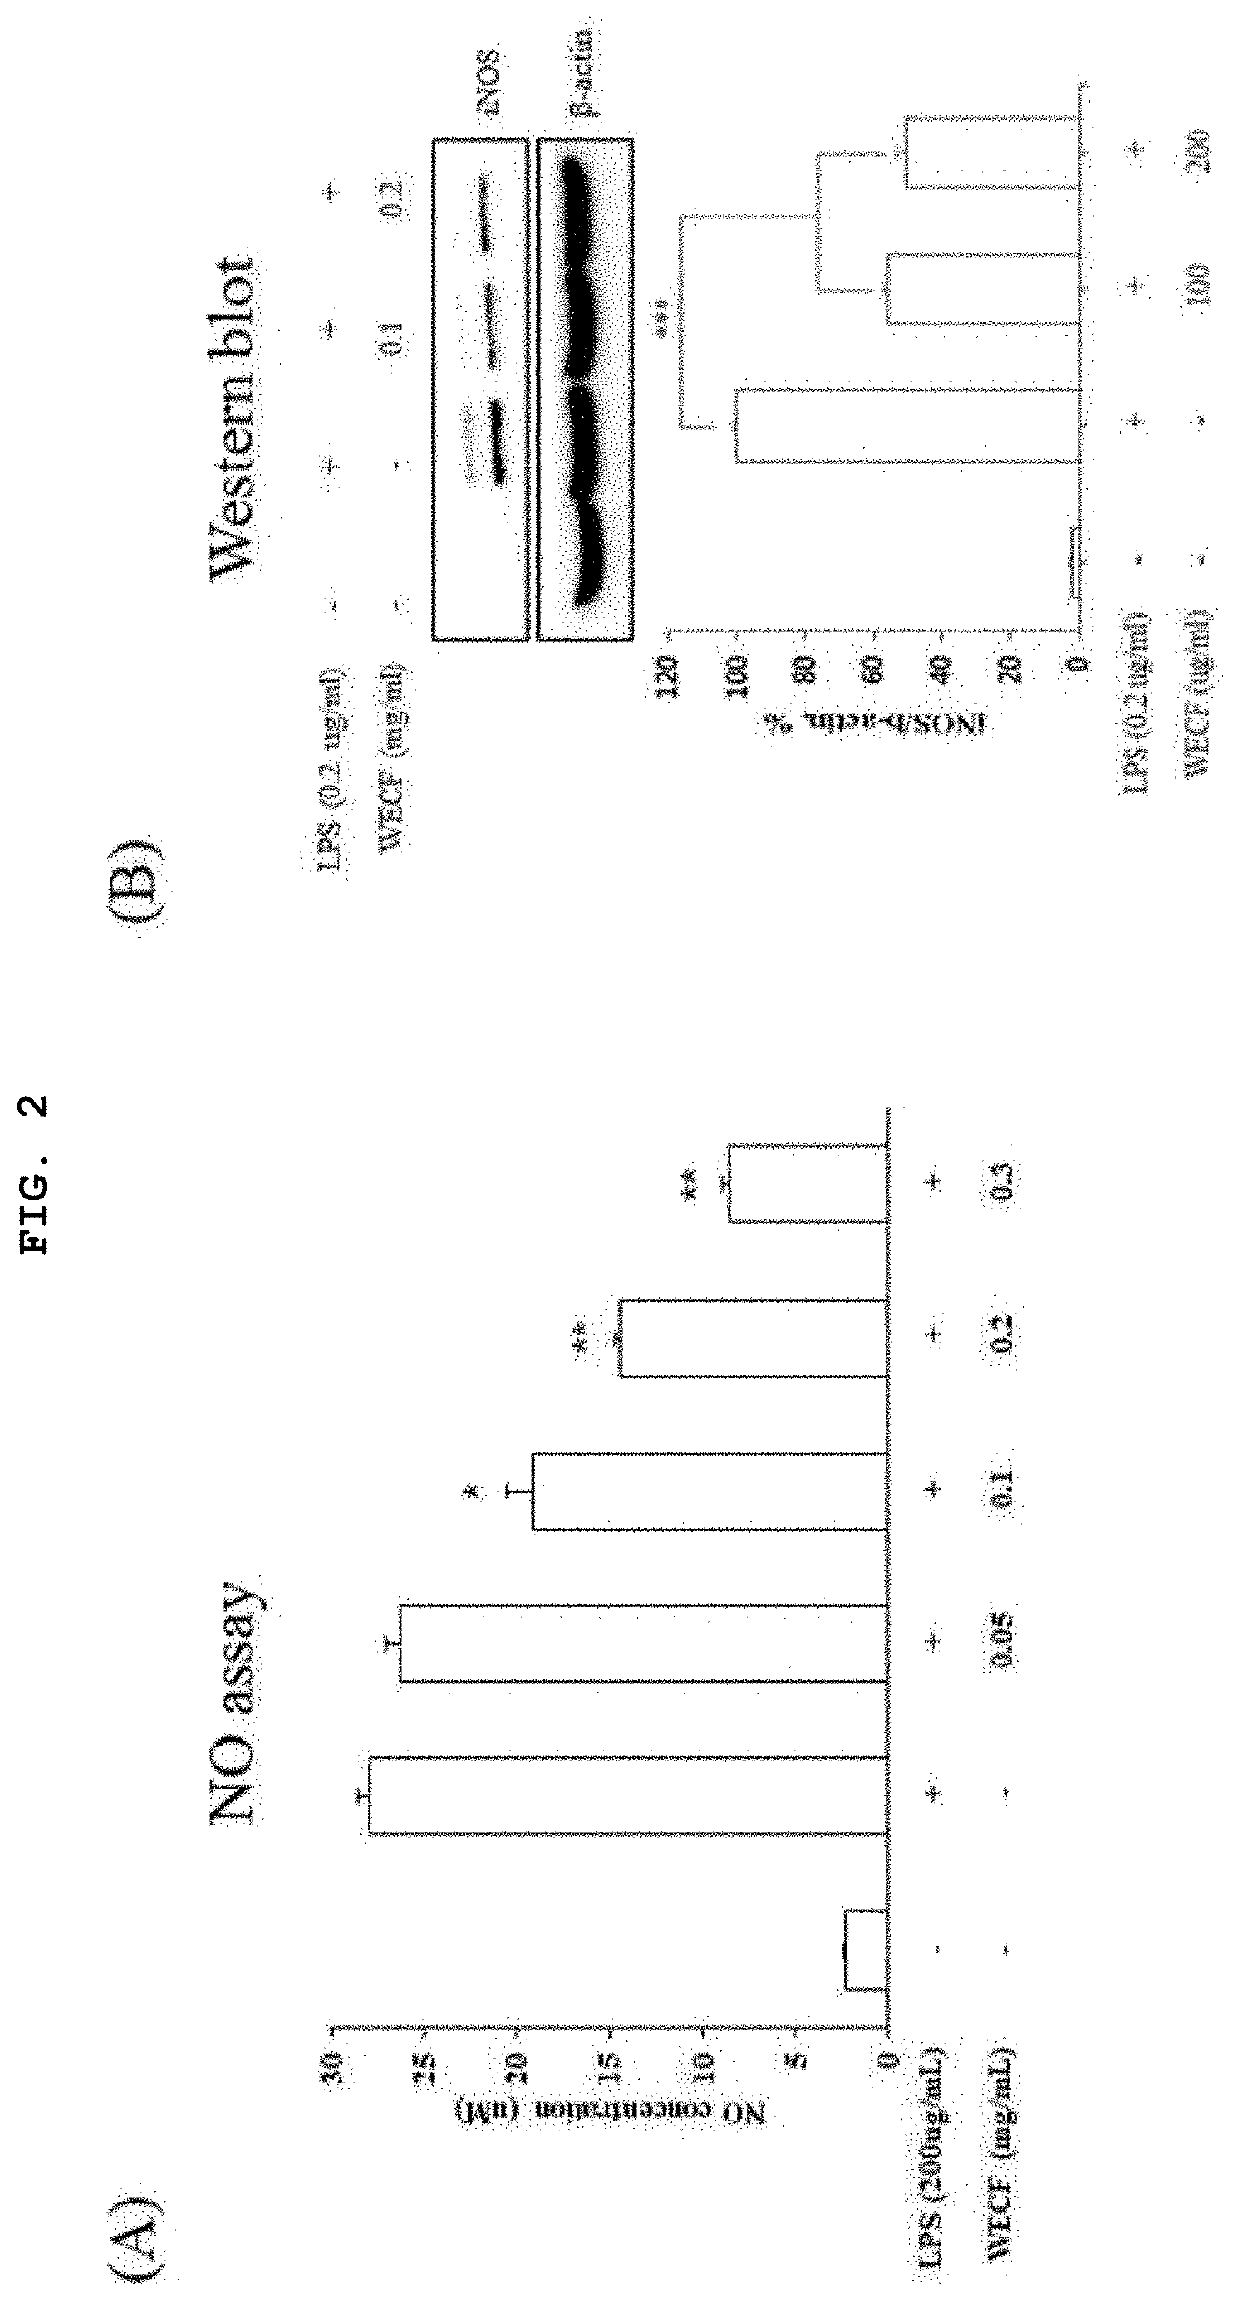 Pharmaceutical composition comprising codium fragile extract as effective ingredient for protecting or treating articular cartilage